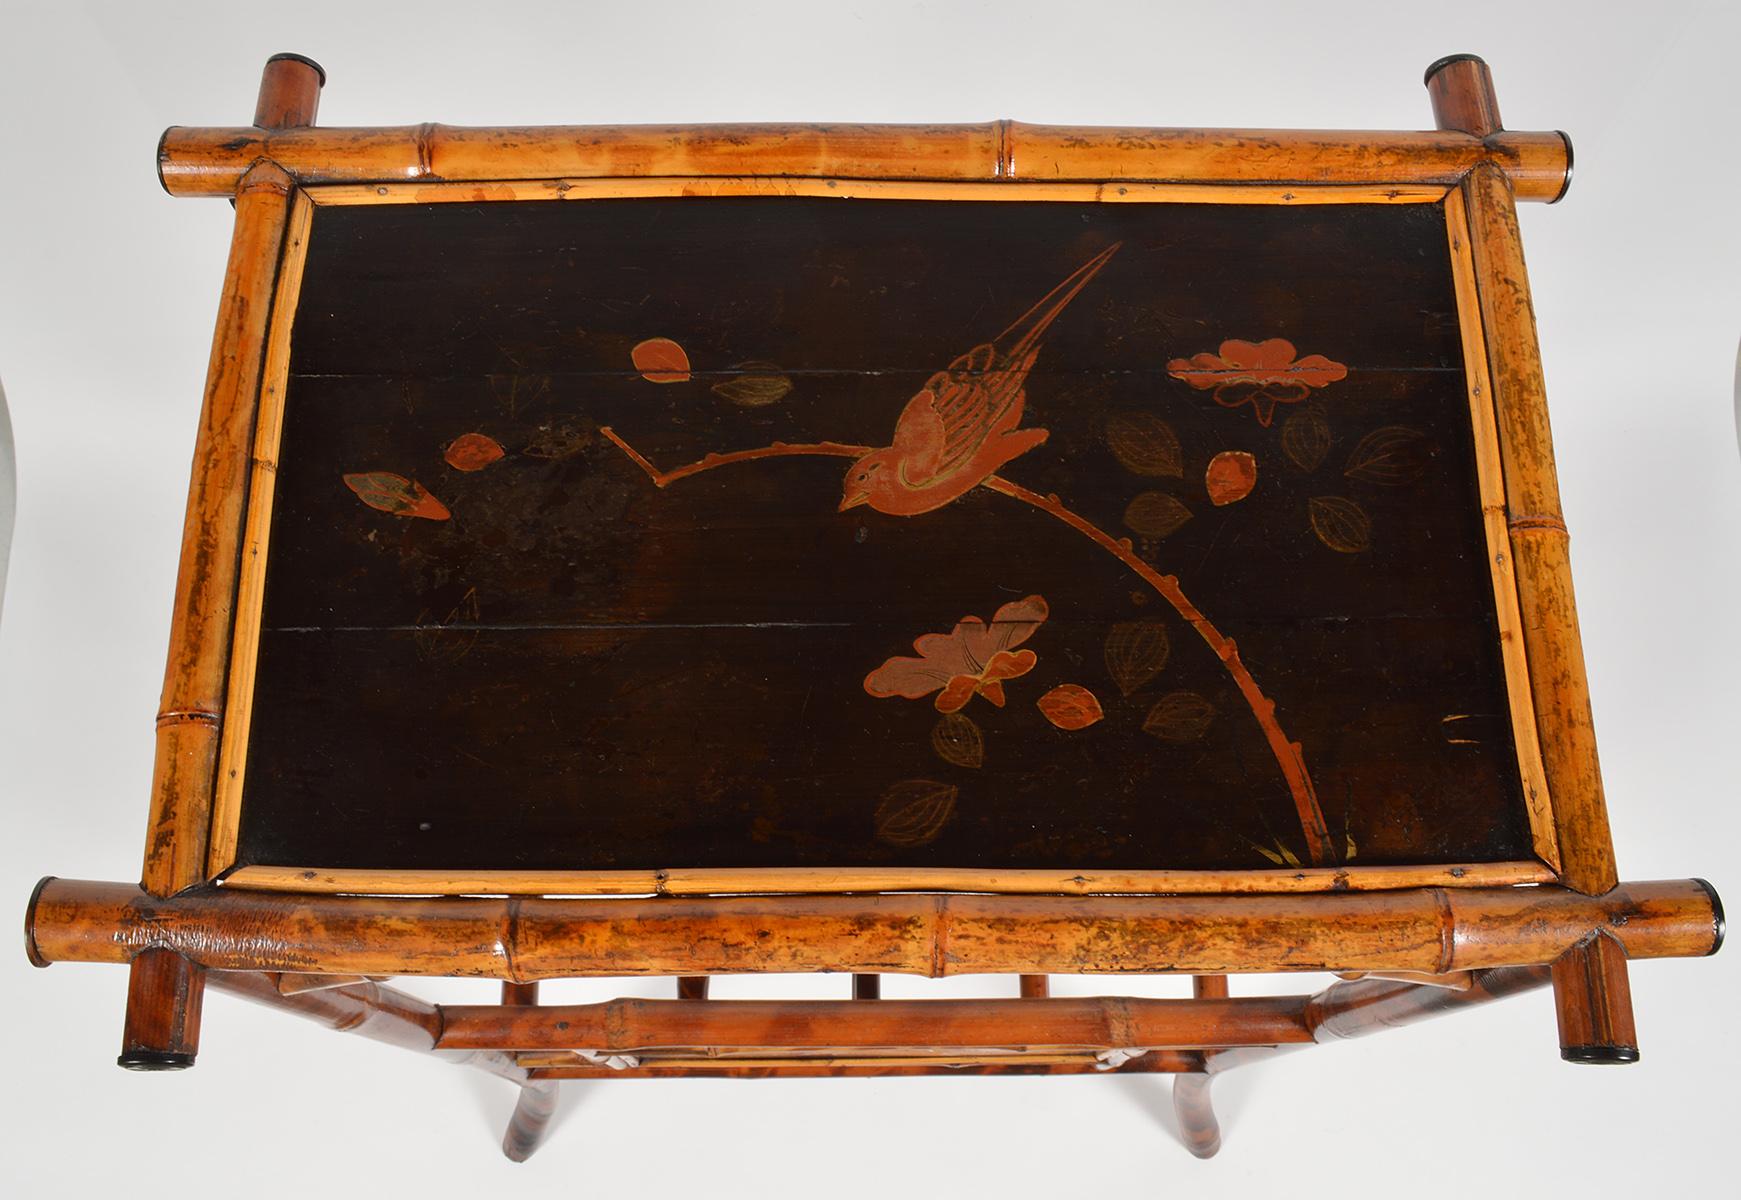 This unusual 19th century English bamboo table serves both as a table and a magazine rack. The japanned lacquered top features a bird in a garden and the two panels a similar decoration. It is an excellent representative of the late 19th century